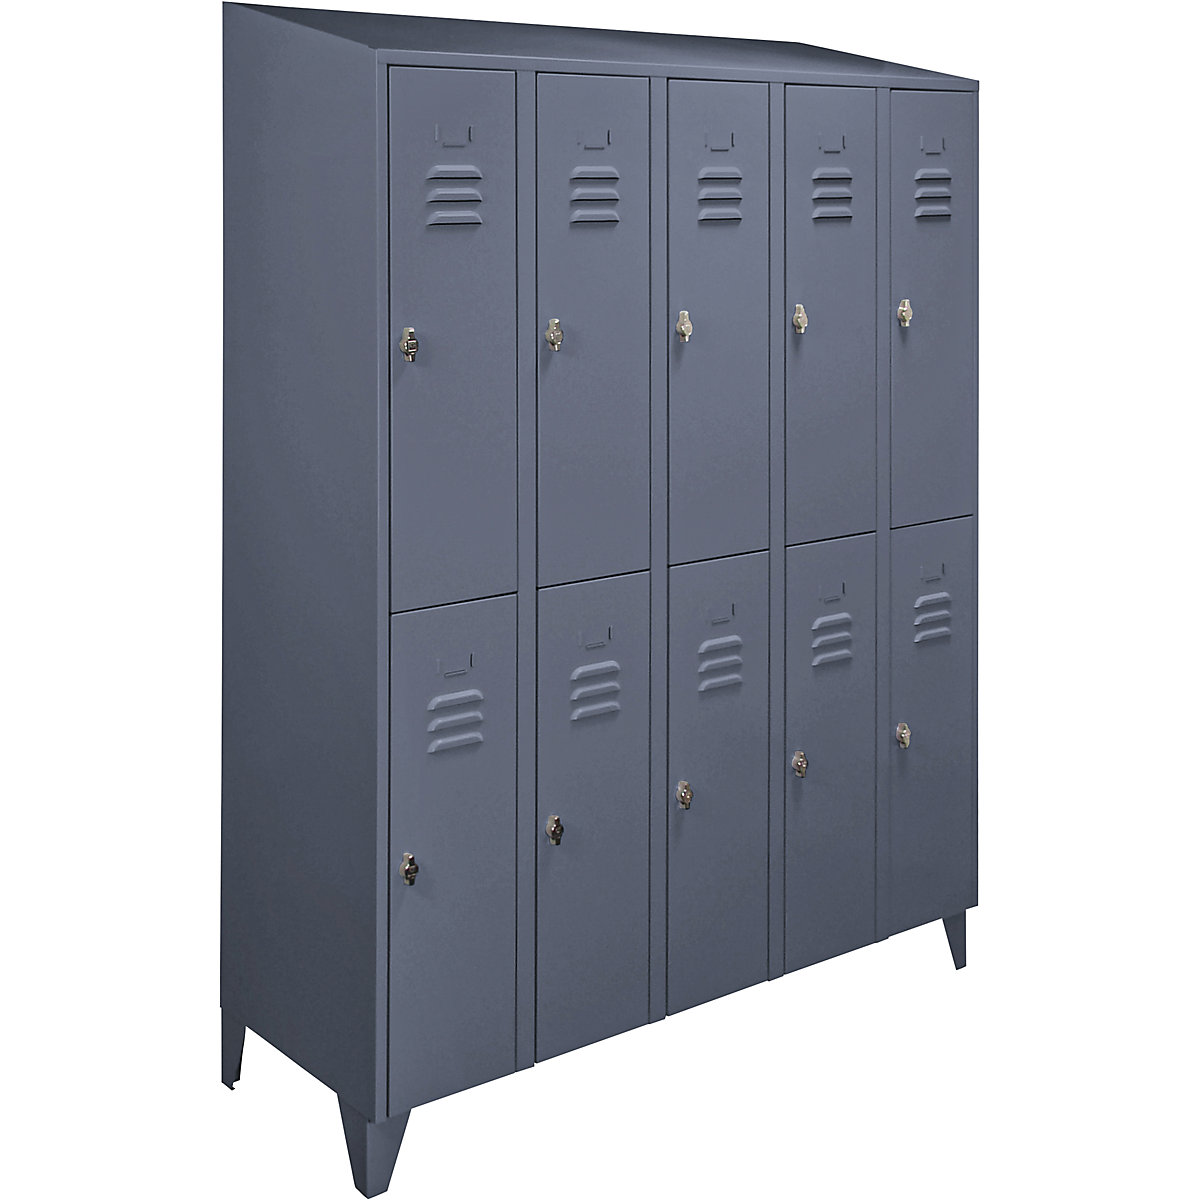 Cloakroom locker with sloping roof, half-height compartments - Wolf